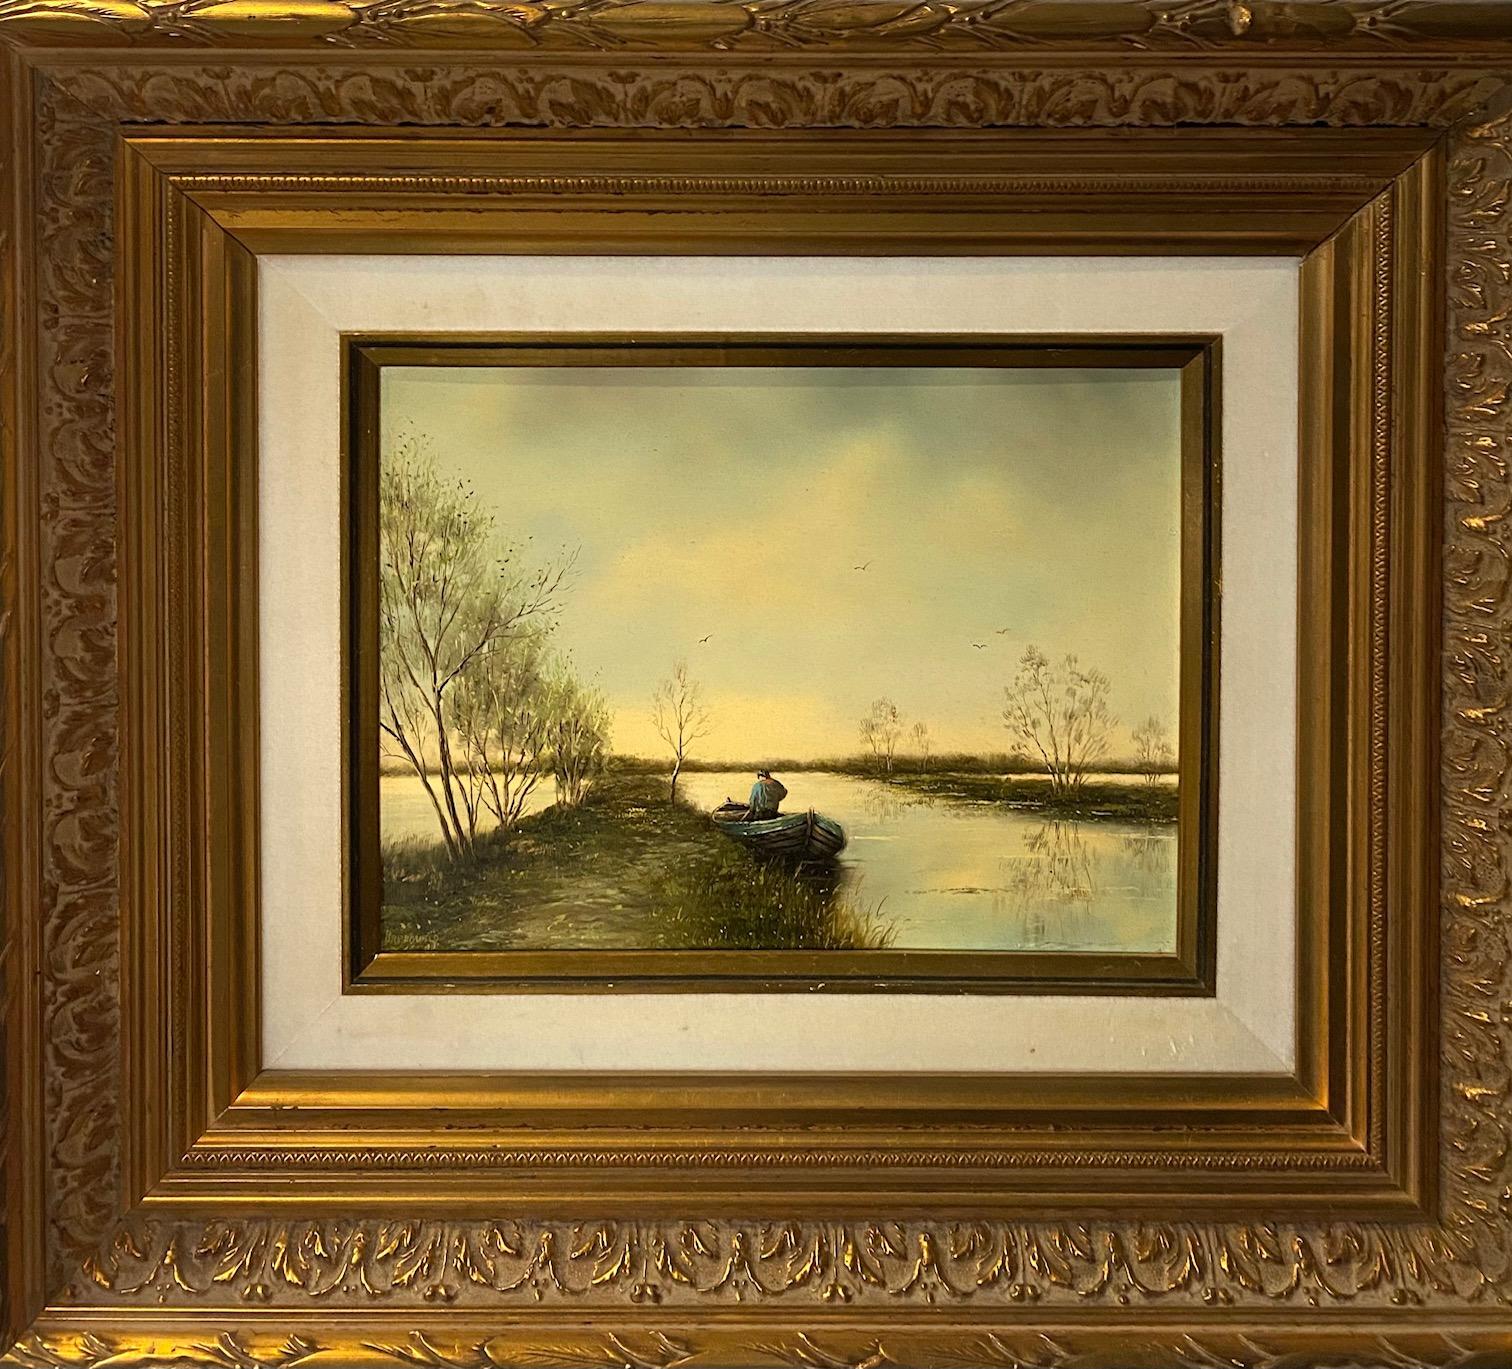 Oil on wood sold with frame 
Total size with frame 43x37 cm

Breedveld was born in 1921. in Spaarnewoude (Holland)
A self-made art painter. Painted mainly on panel sizes 18x24 and 30x40 cm. After 13 different trades and lot of accidents, he became